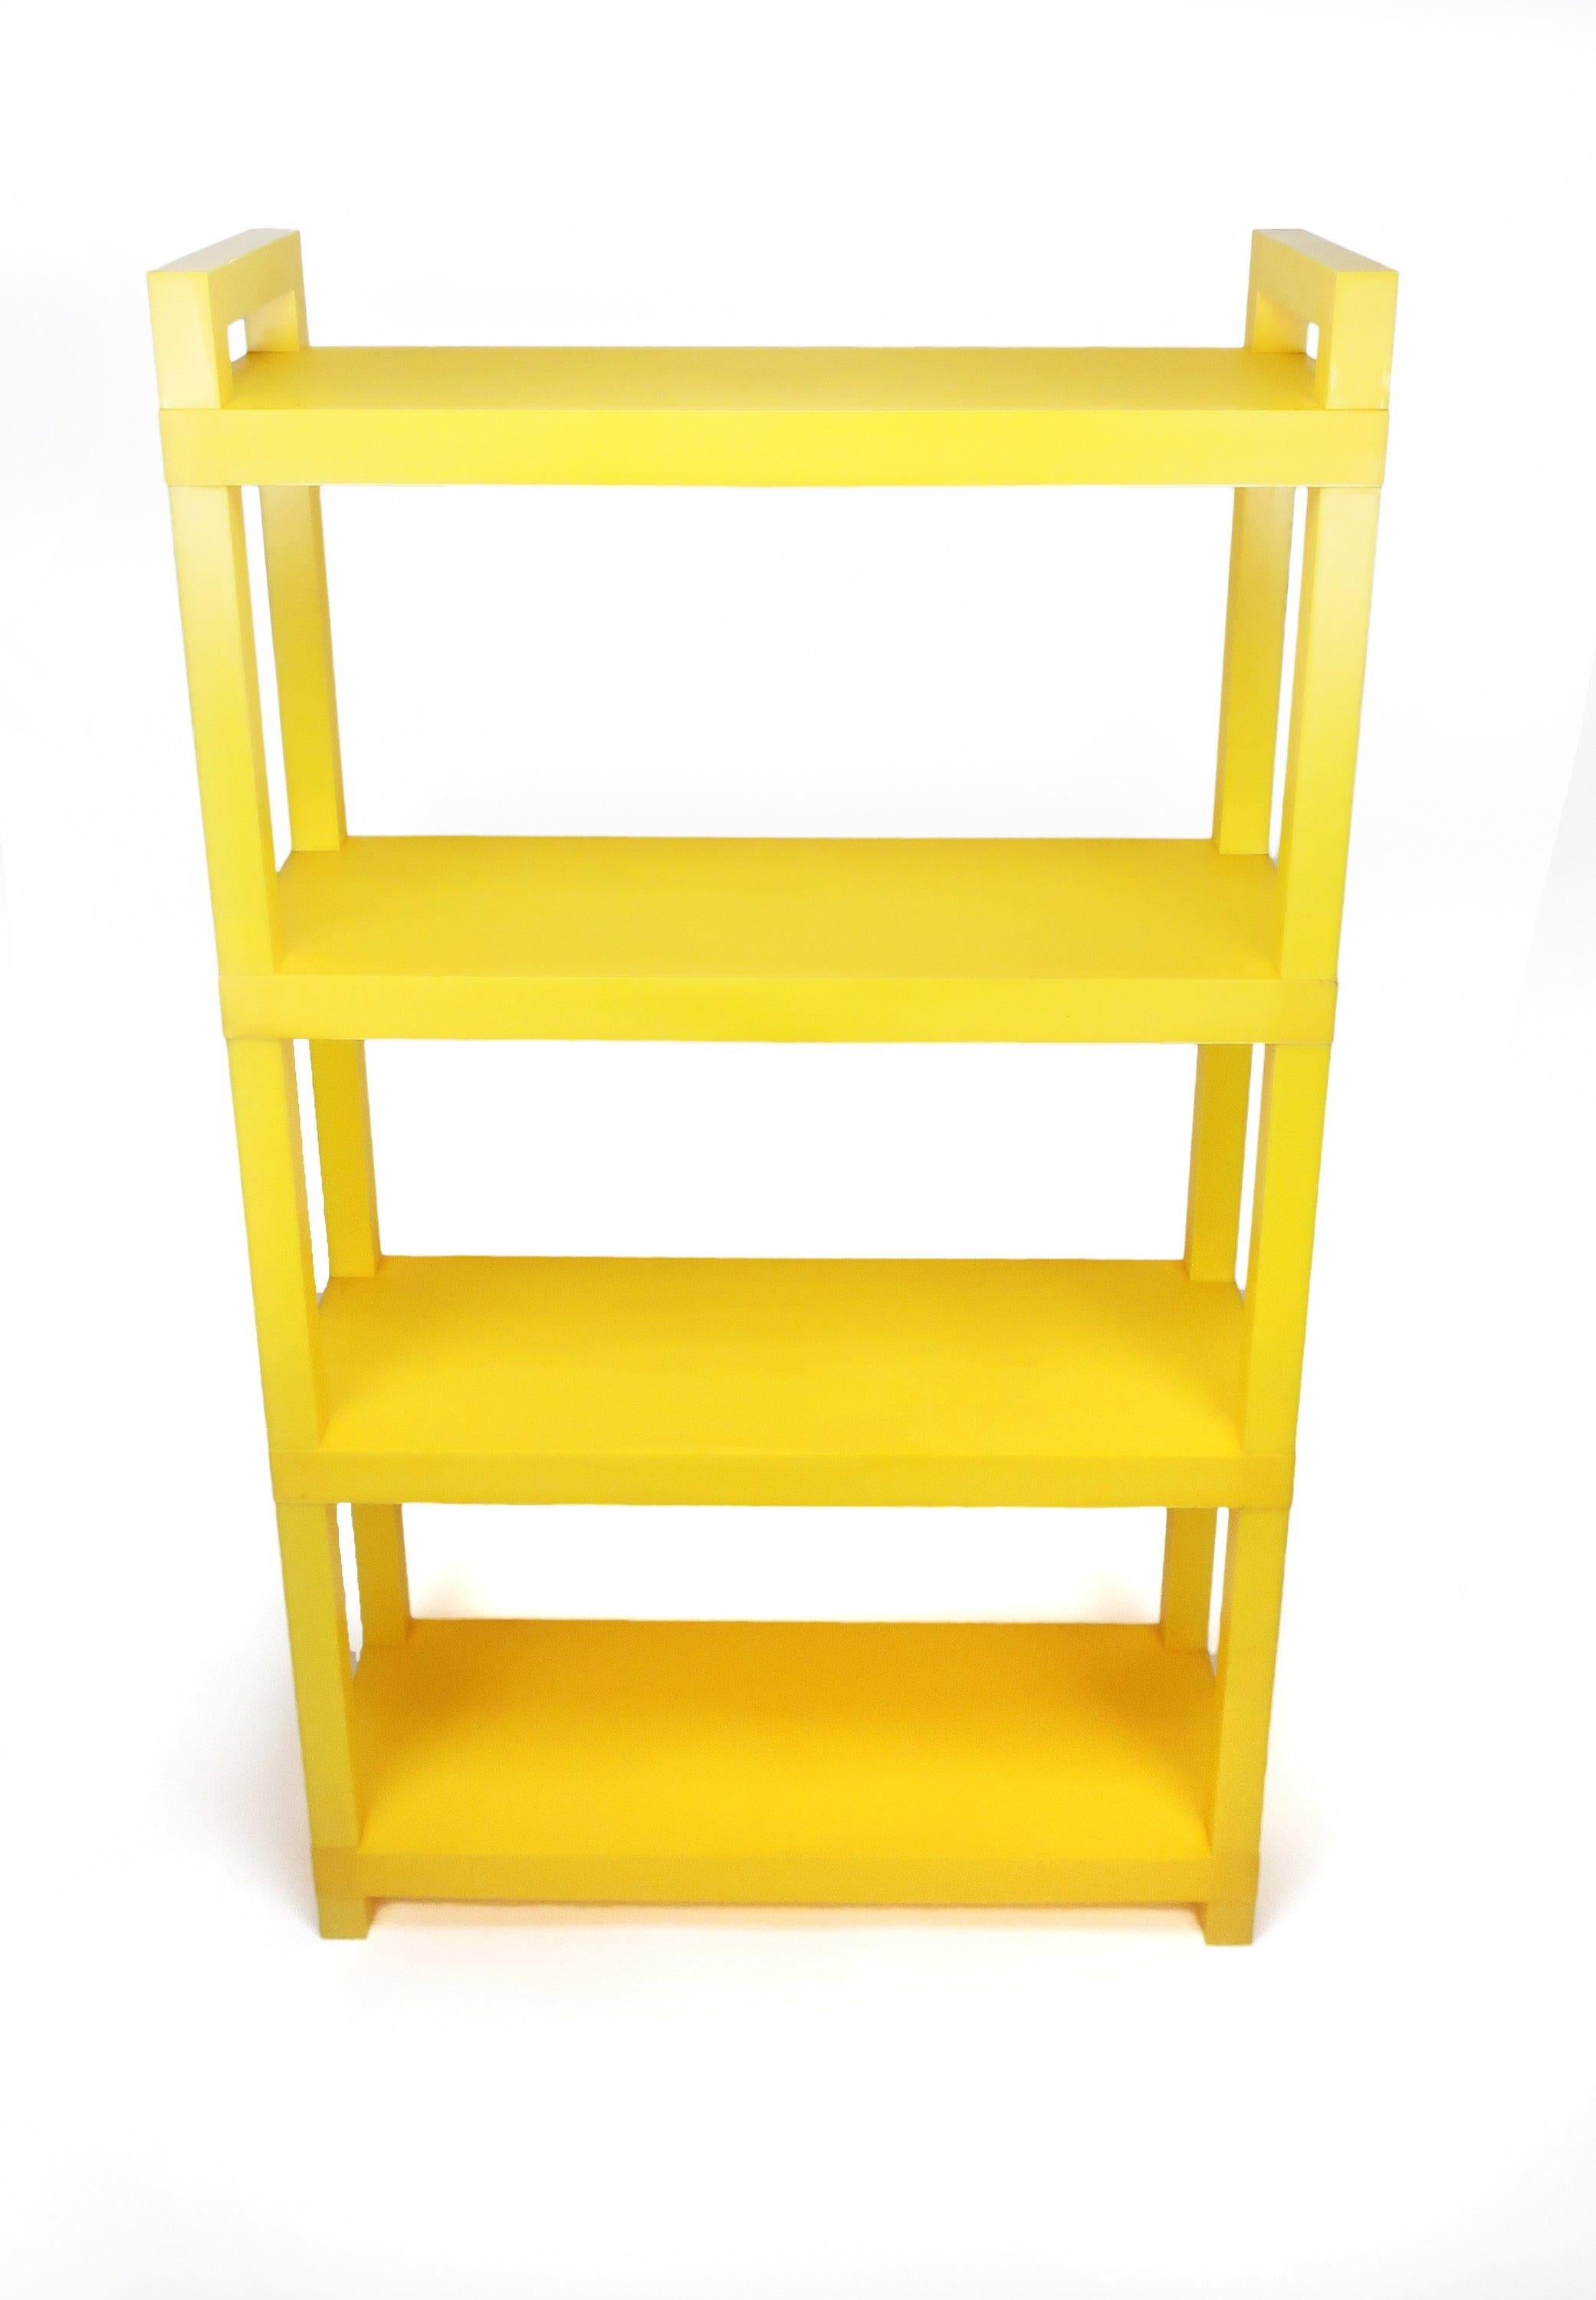 A bright and sunny vintage yellow and white plastic shelving system in the style of Kartell and Umbo. It is modular and can be used as a wall unit, book shelf, or separated into low side tables. Interchangeability allows for shelves of all one color